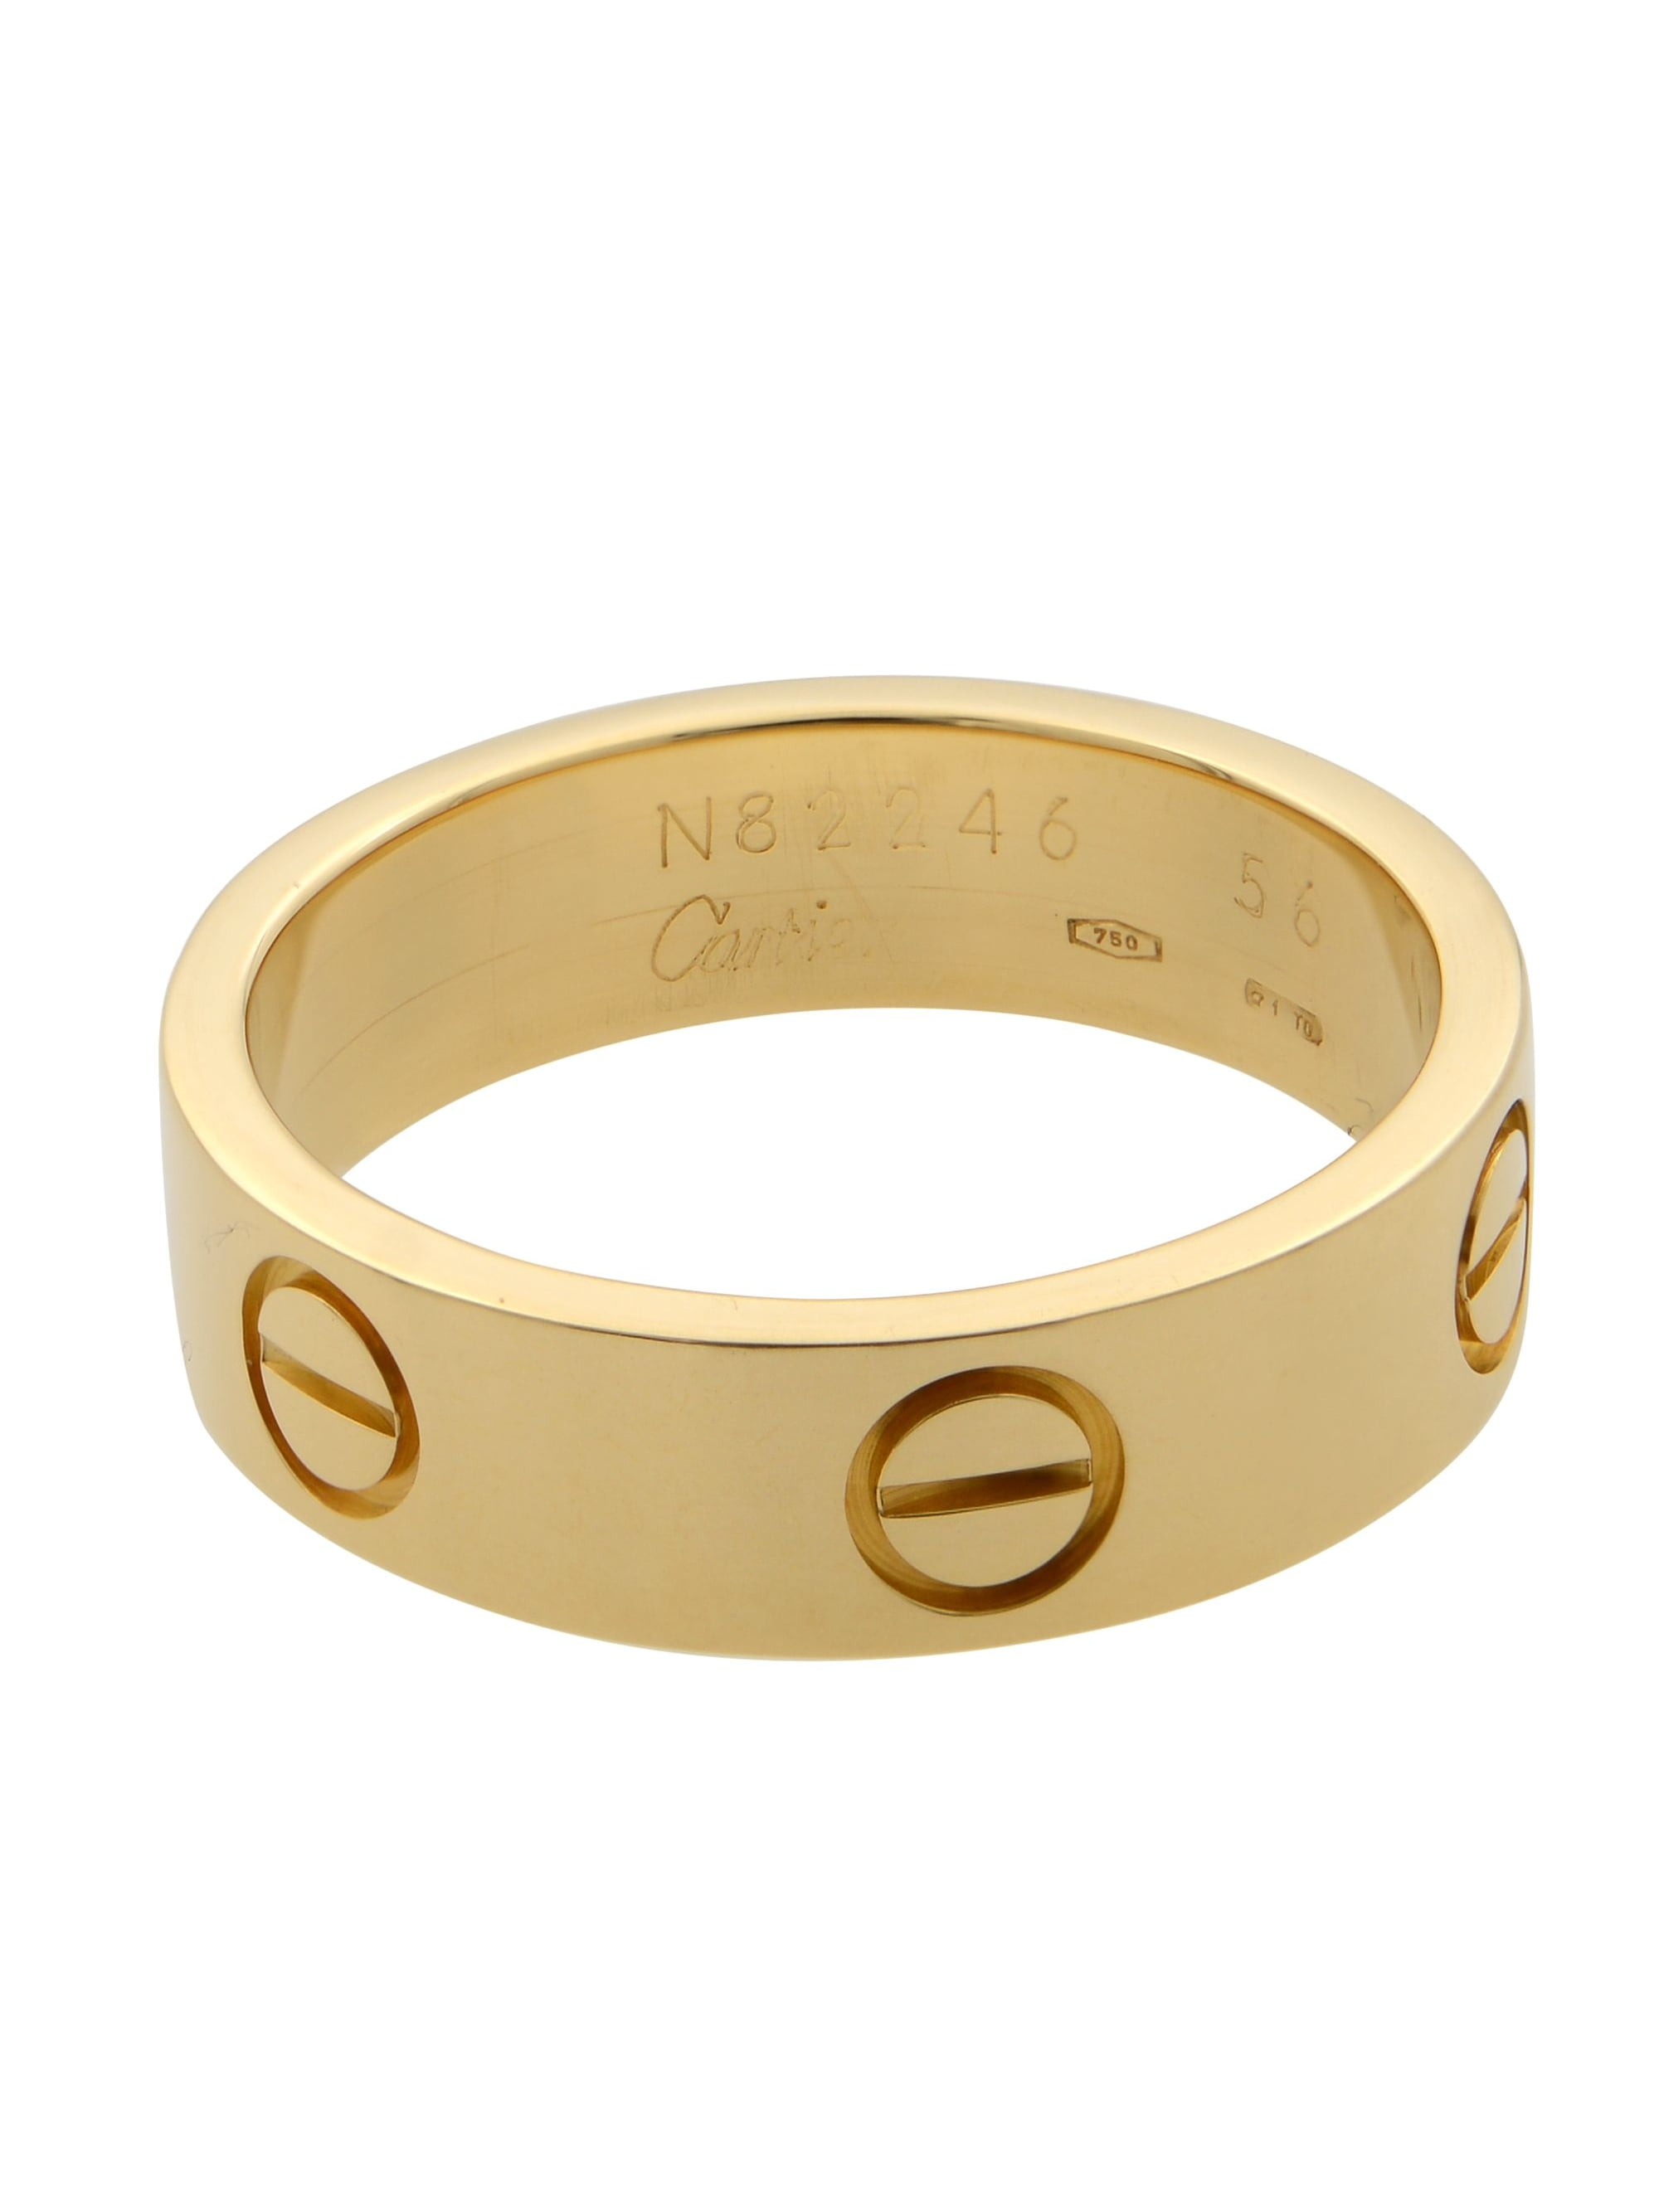 cartier love ring yellow gold